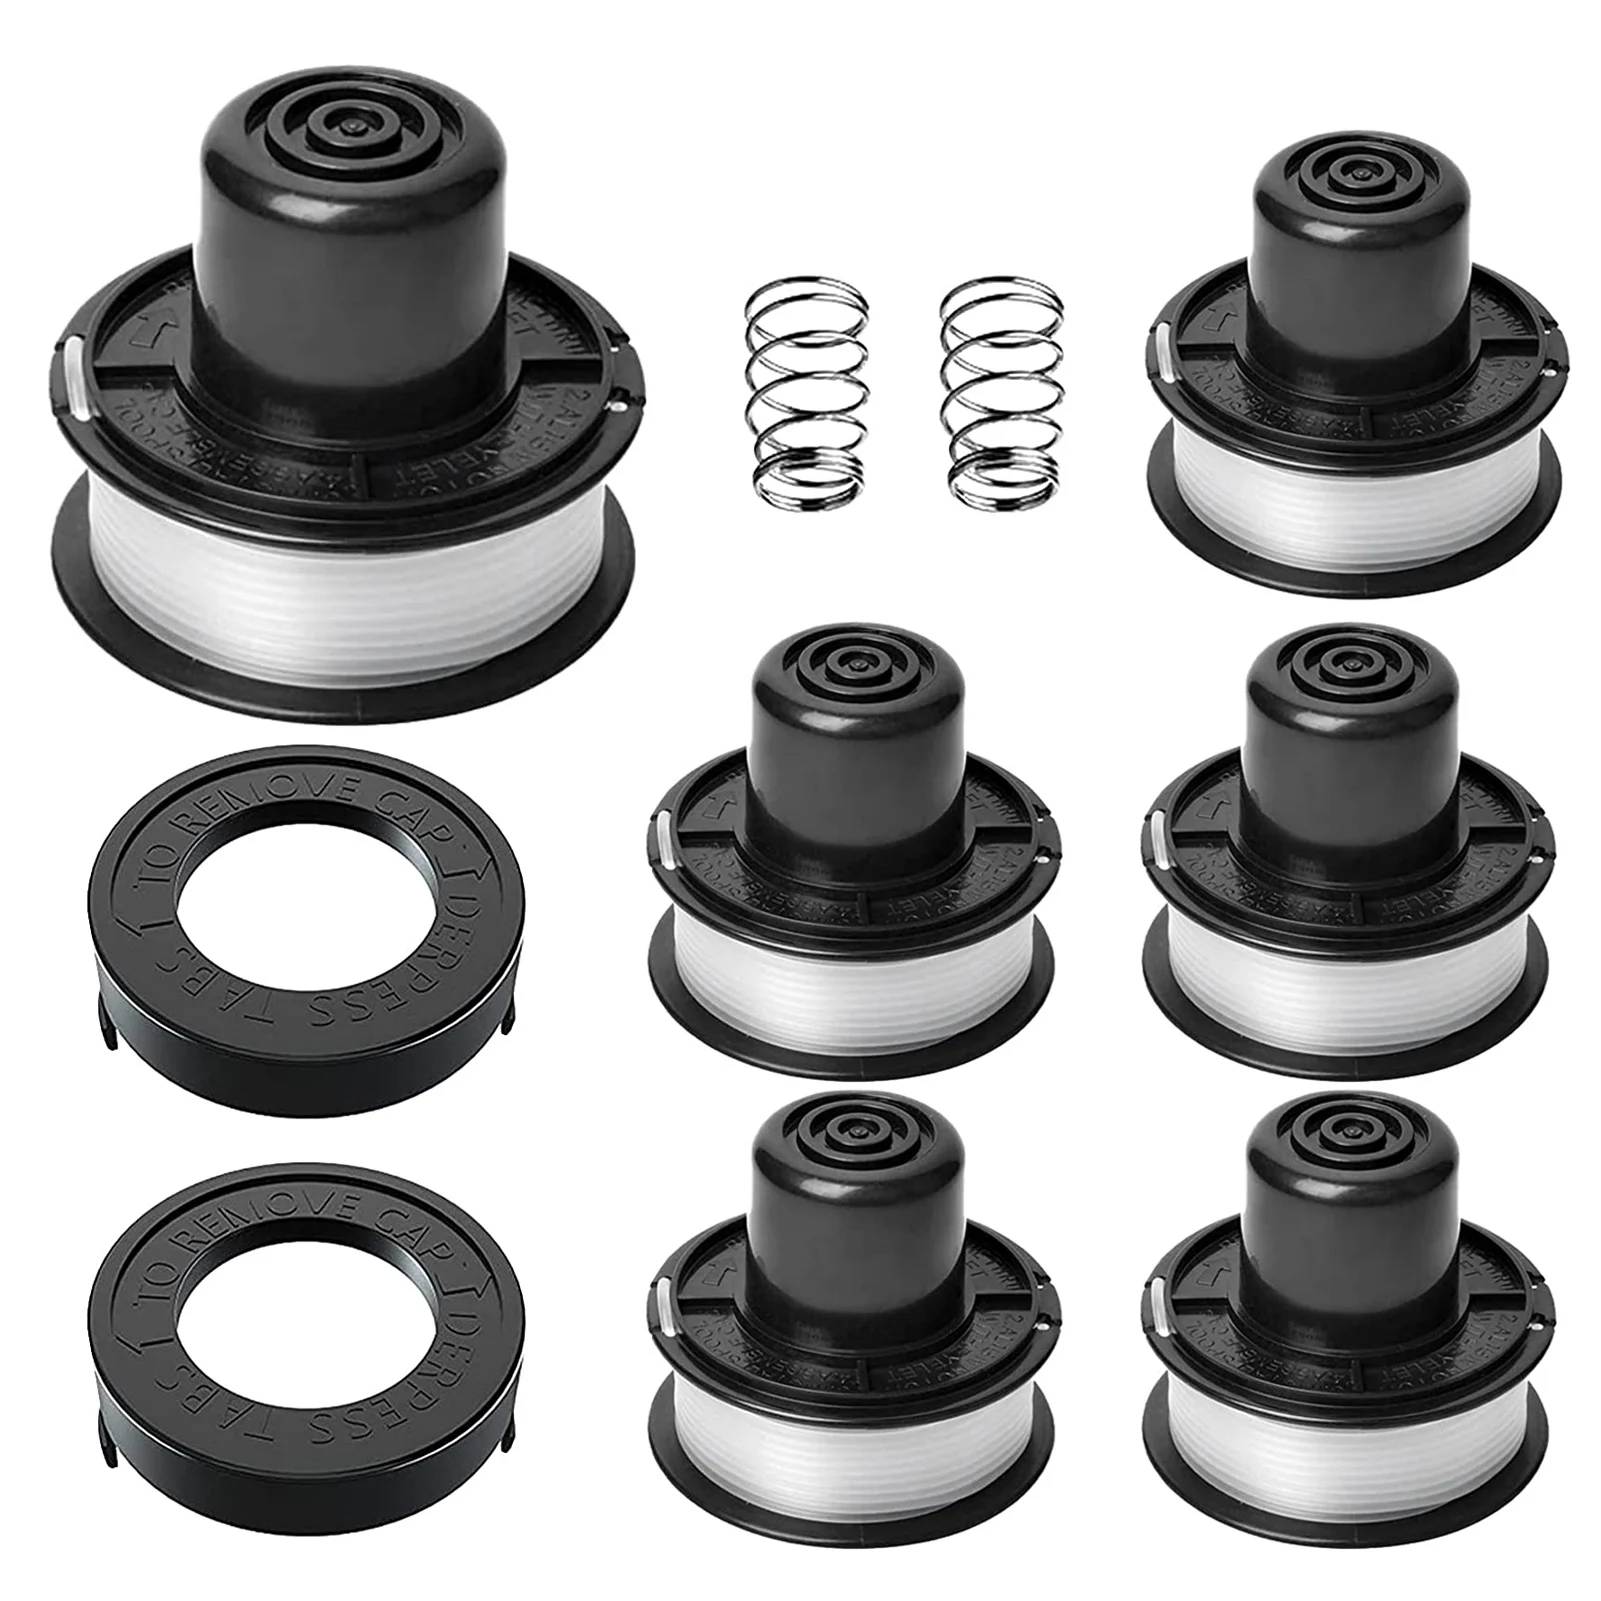 Replacement Spools For Black & Decker St1000 St4000 St4500 Ge600 Cst800 St6800 Bump Feed Spool Rs-136